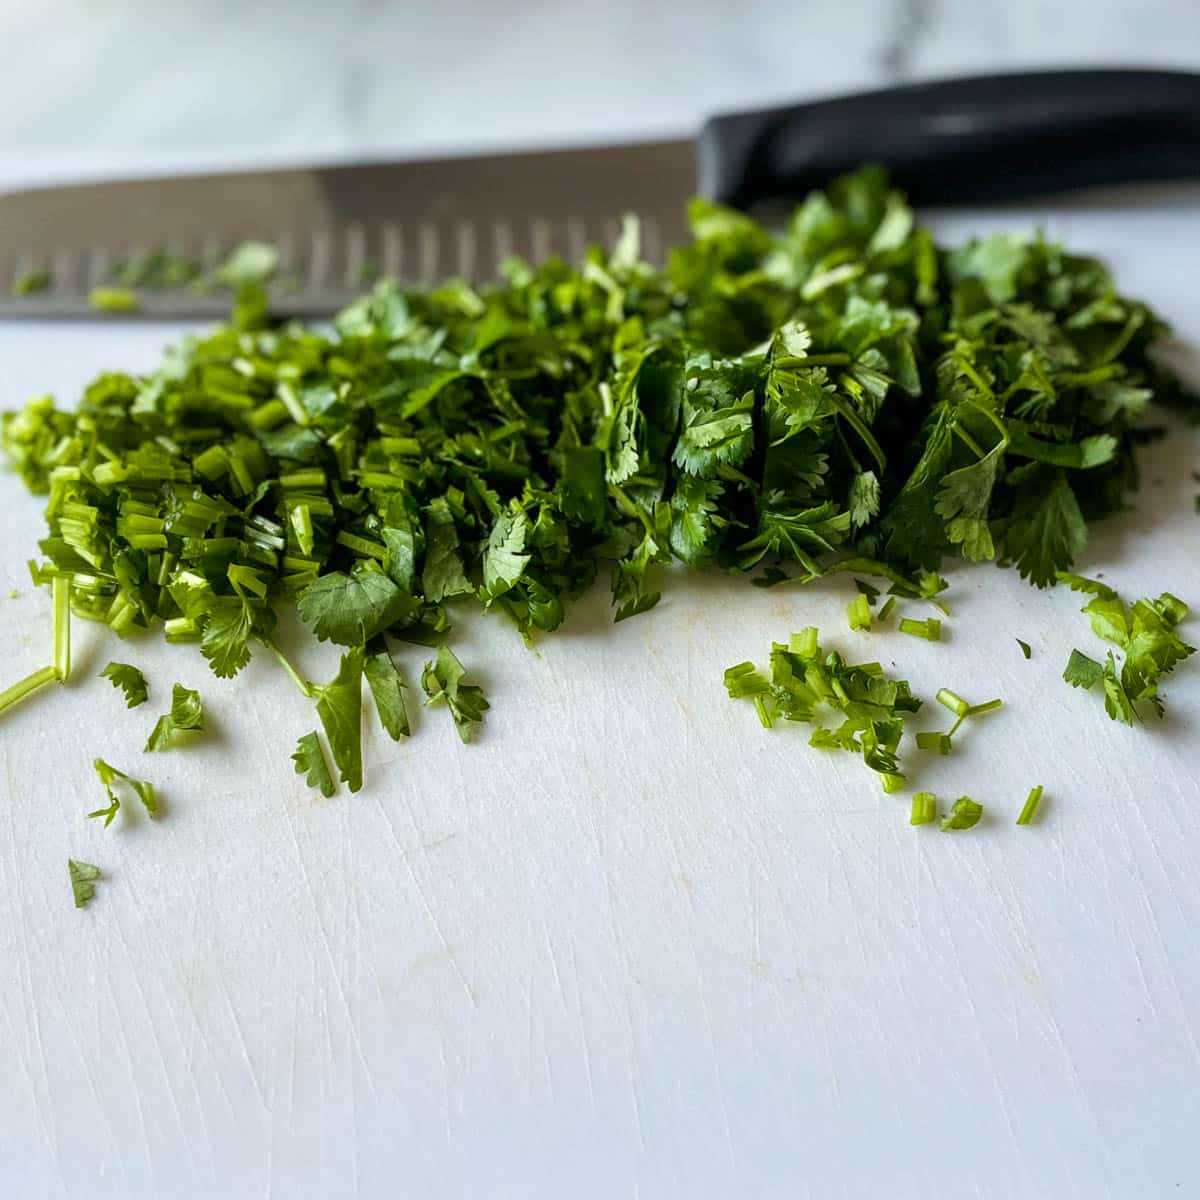 Chopped fresh cilantro is shown on a white cutting board with a kitchen knife in the background.